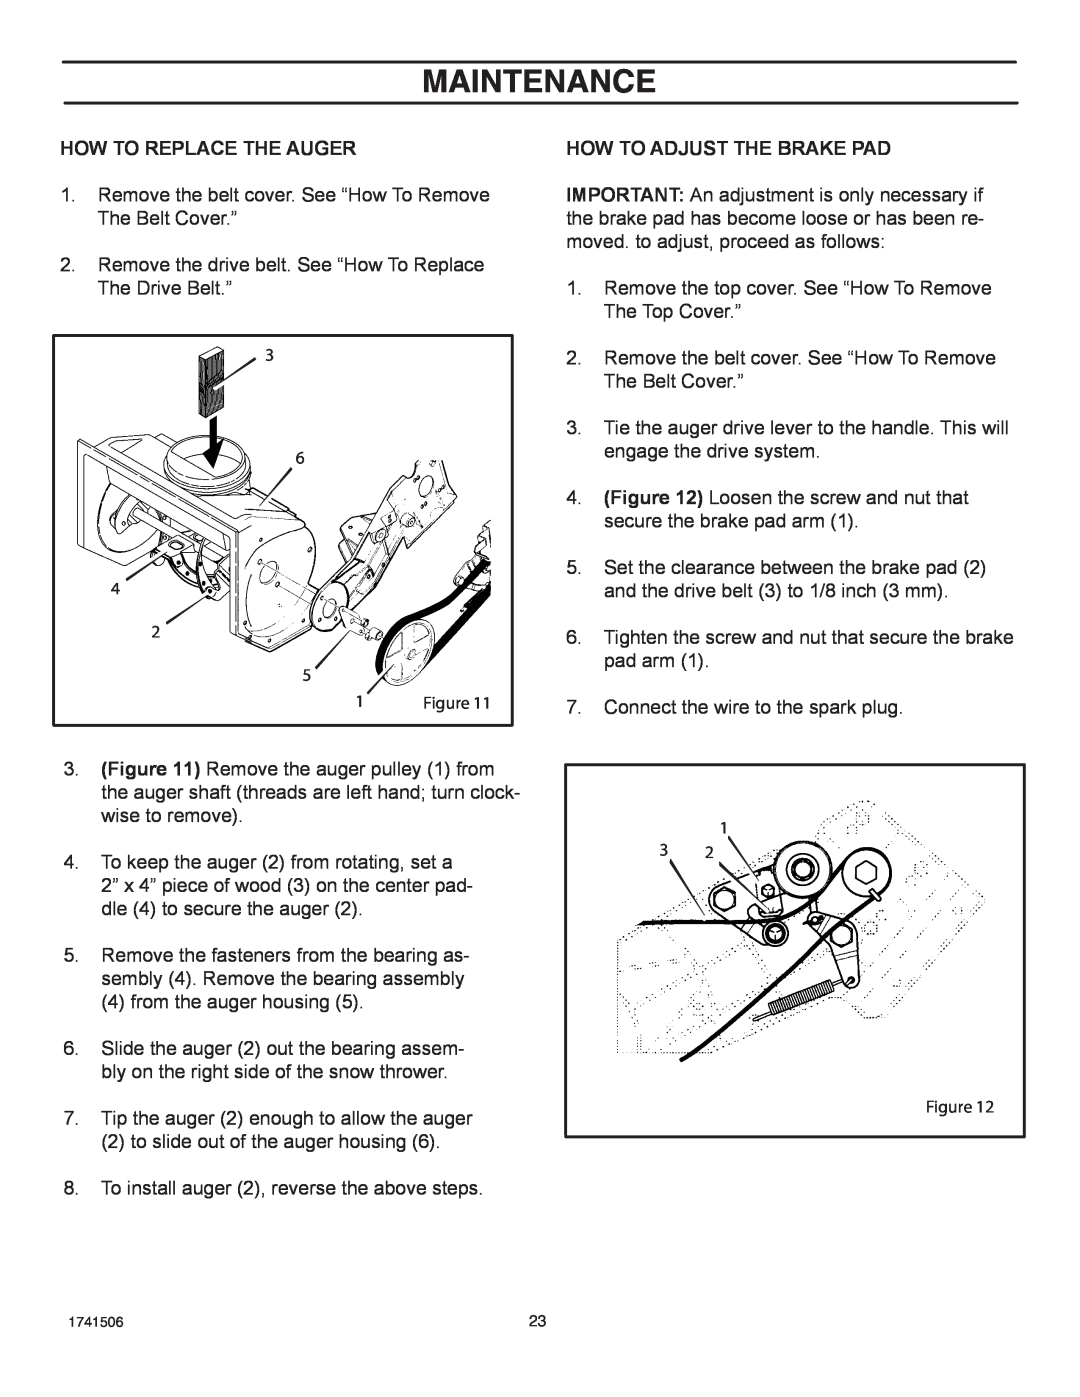 Husqvarna 5021 E, 5021 R manual Maintenance, How To Replace The Auger, How To Adjust The Brake Pad 